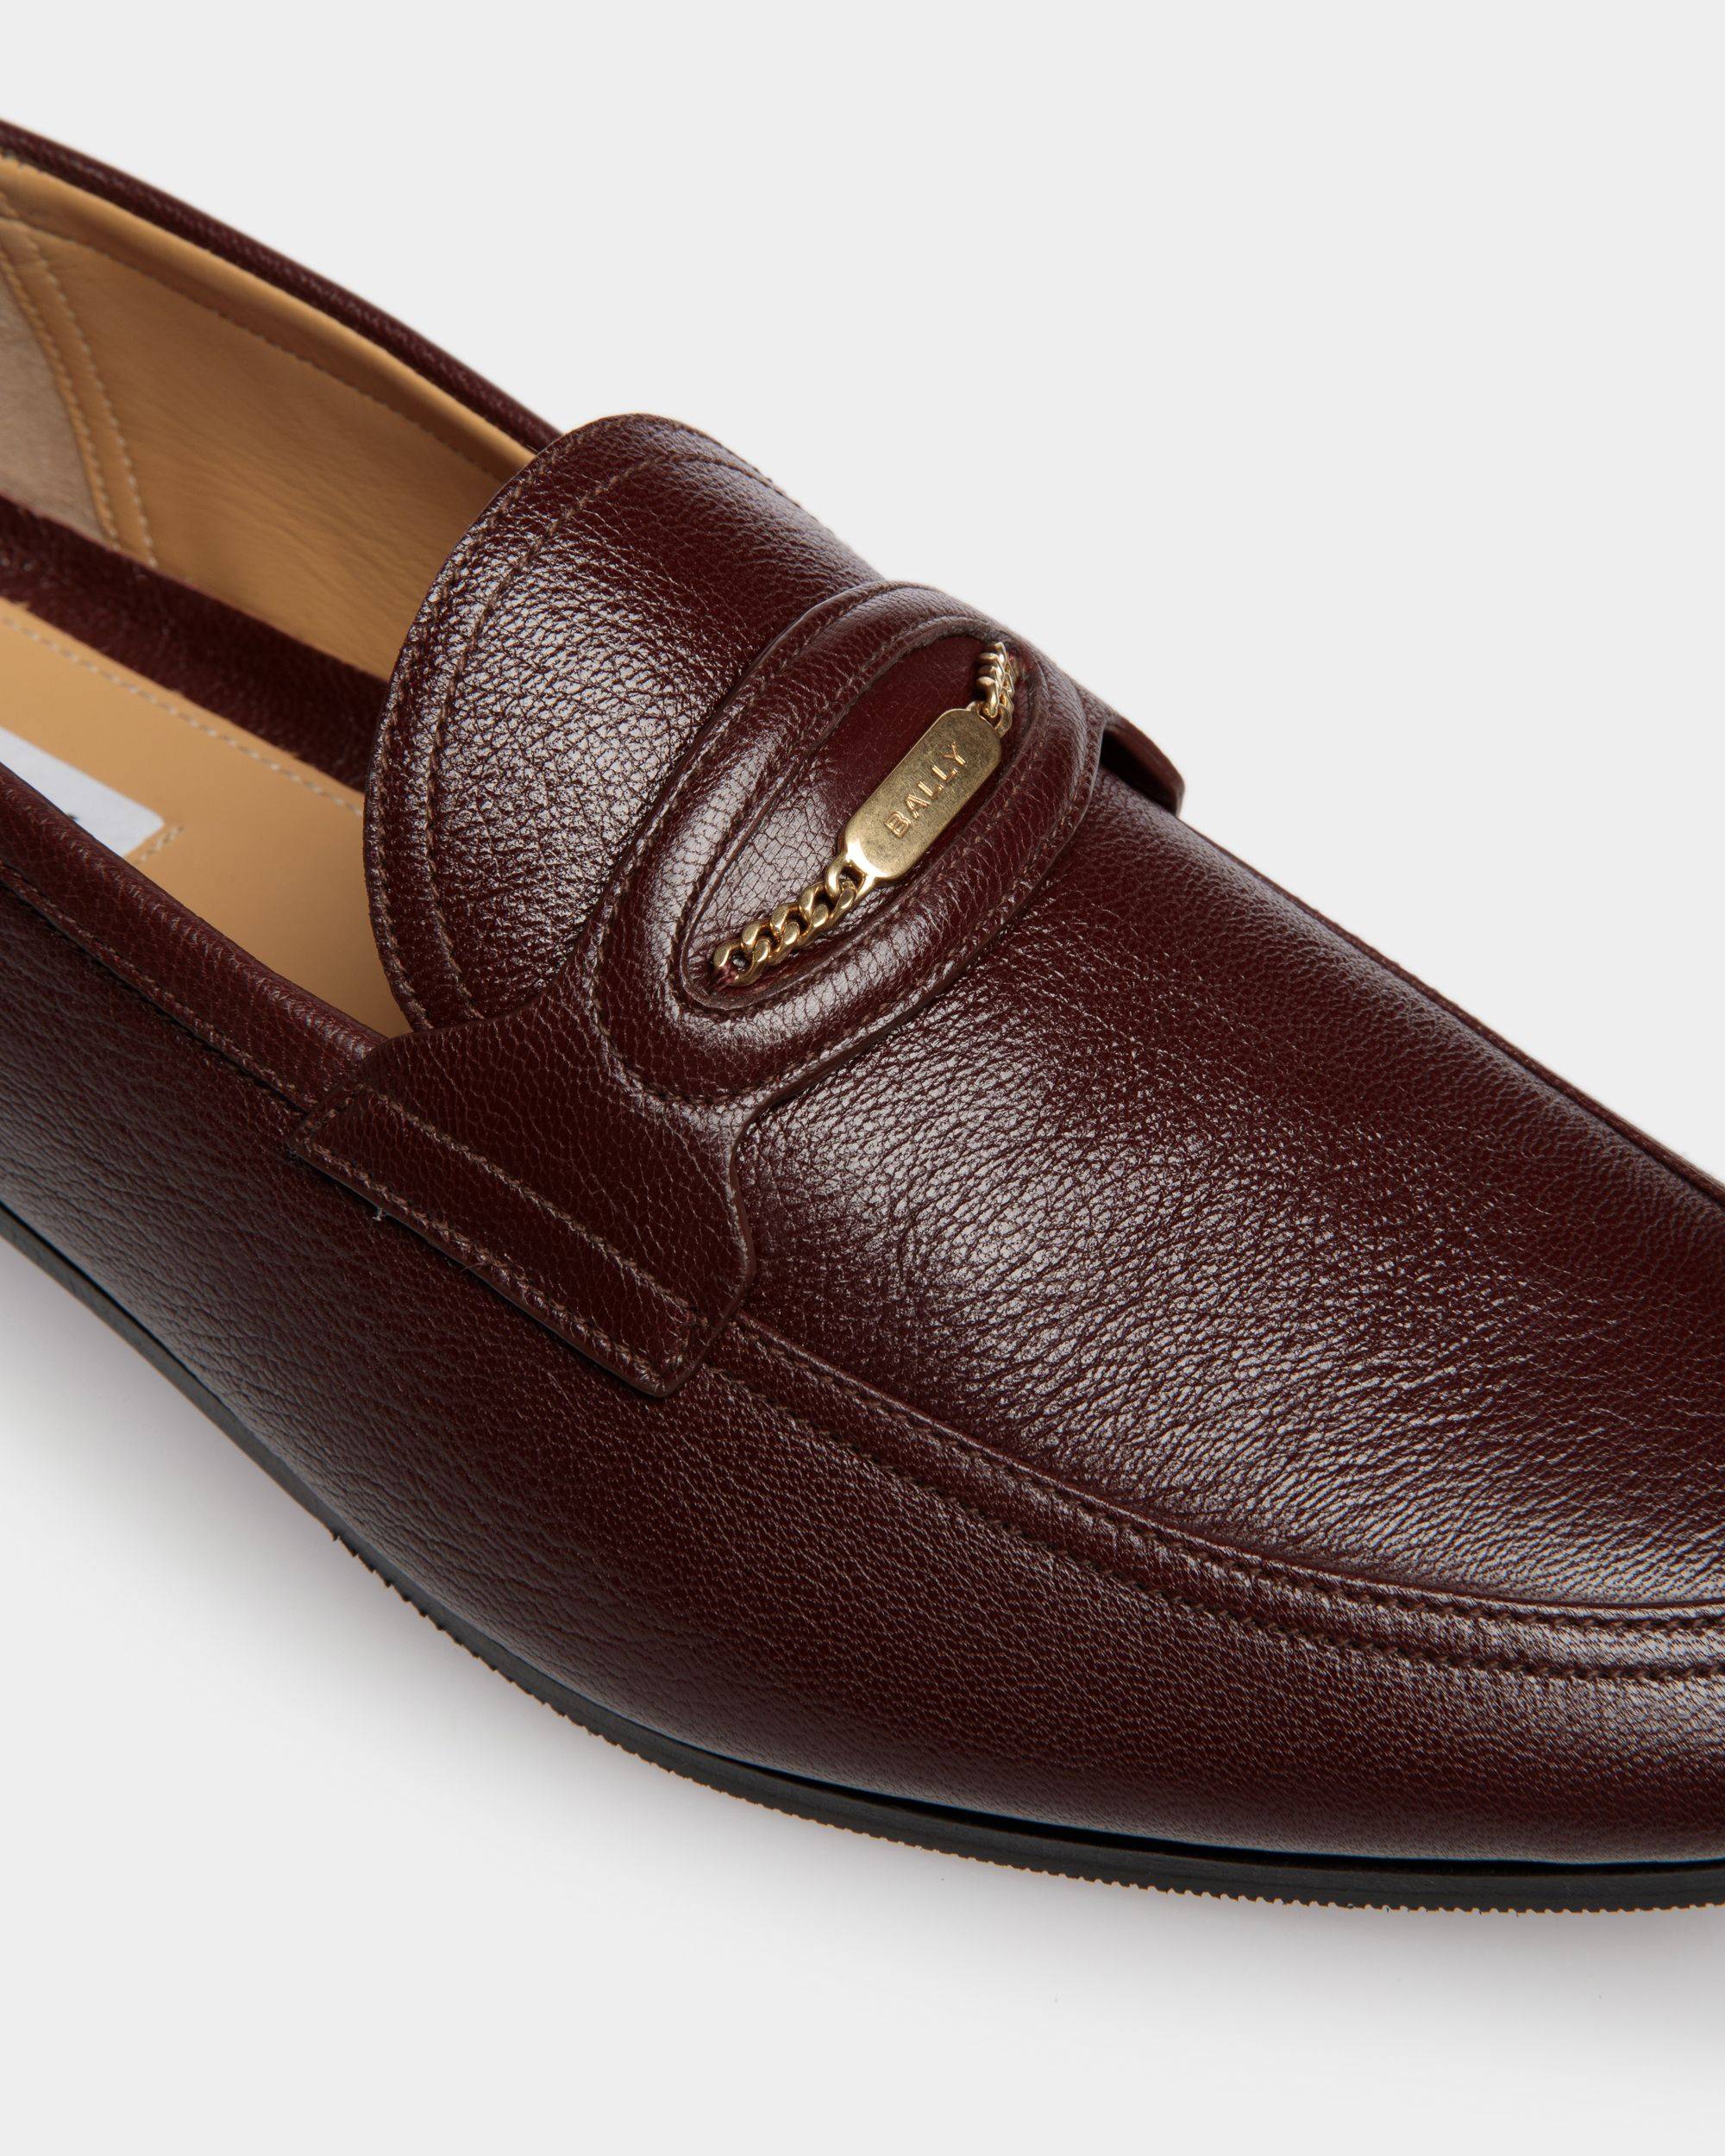 Plume | Men's Loafer in Chestnut Brown Grained Leather | Bally | Still Life Detail